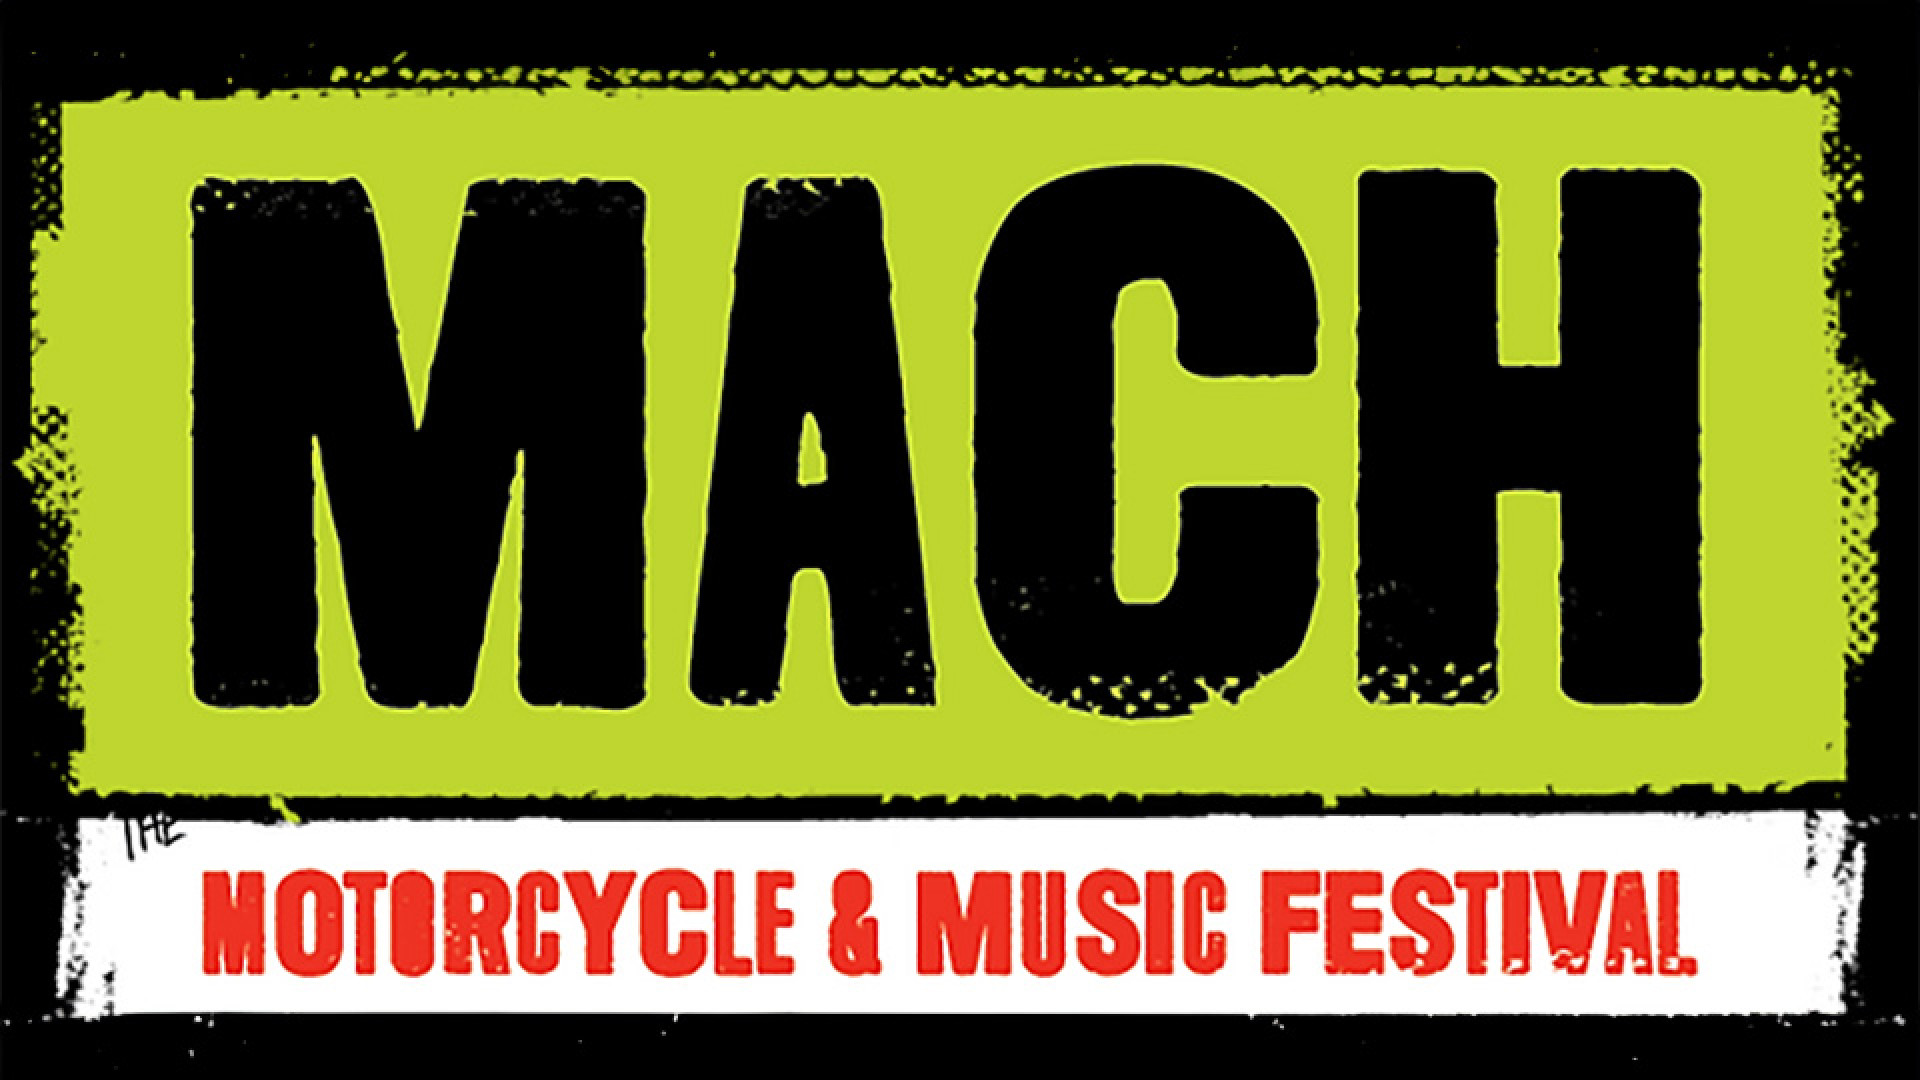 https://www.raceleathers.co.uk/image/cache/catalog/Blog%20Images/MACH24%20Motorbike%20and%20Music%20Festival-1920x1080.jpg